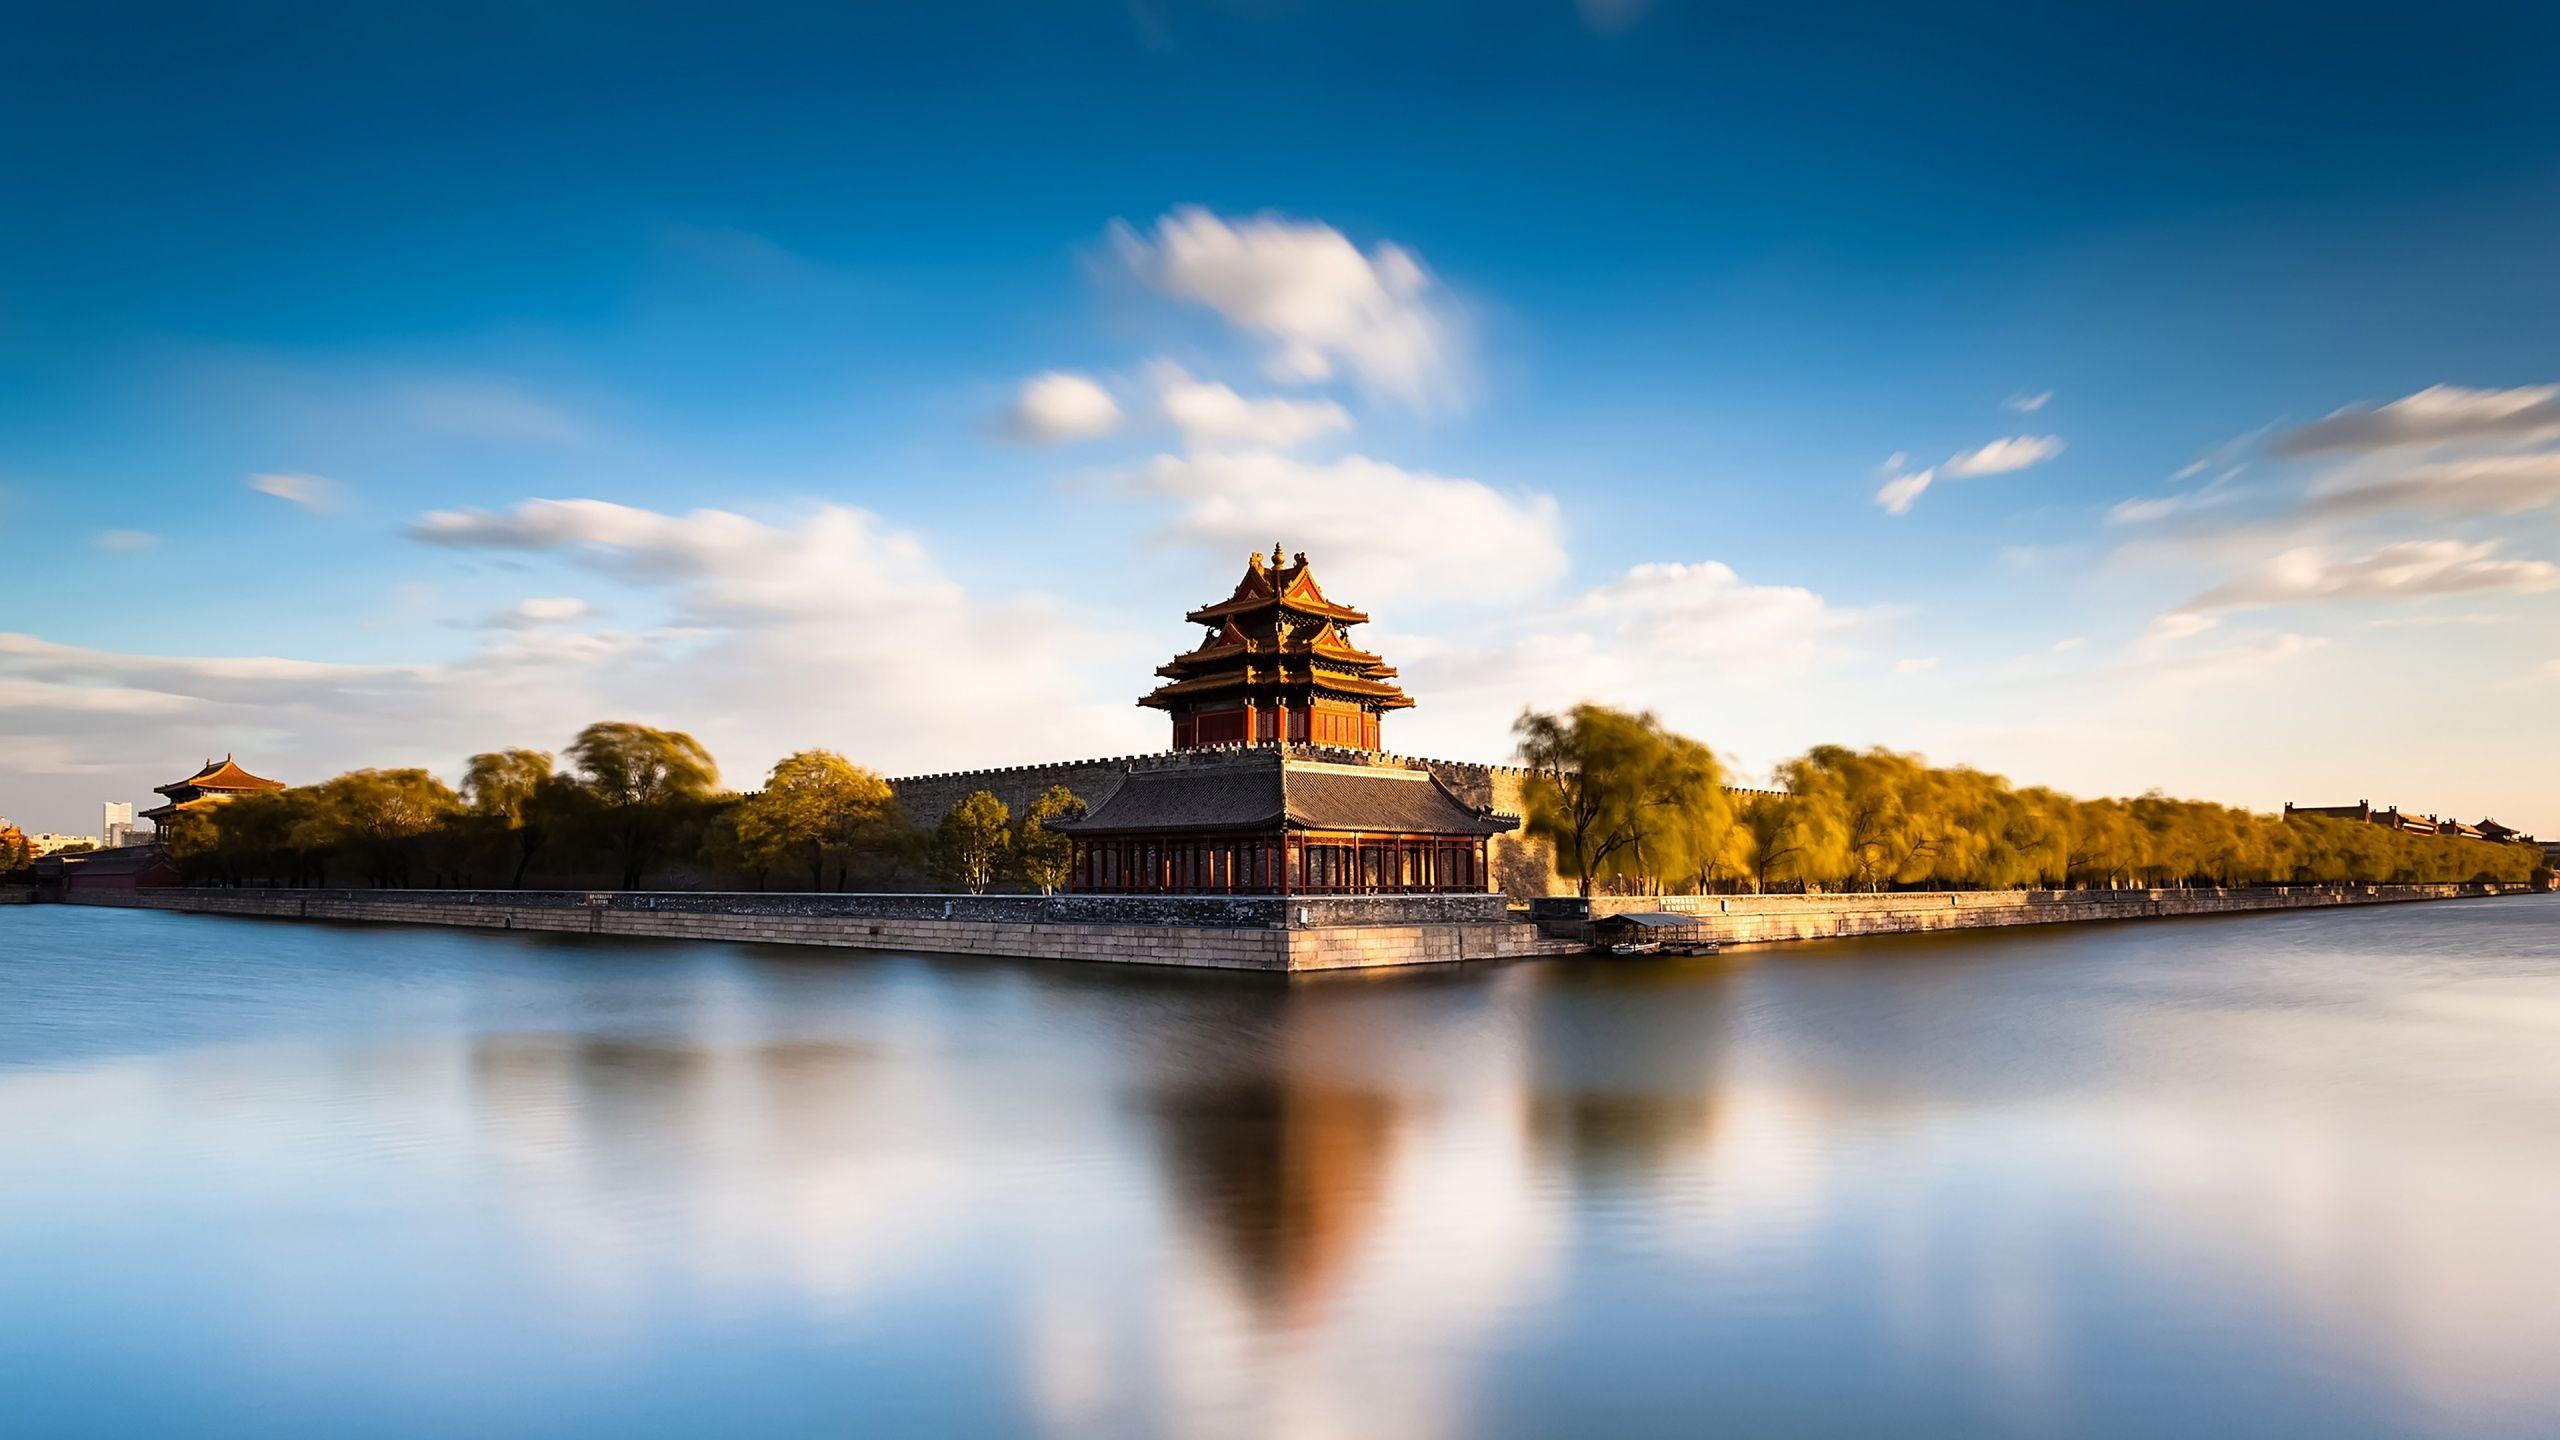 Forbidden City, Beijing, People's Republic of China #china